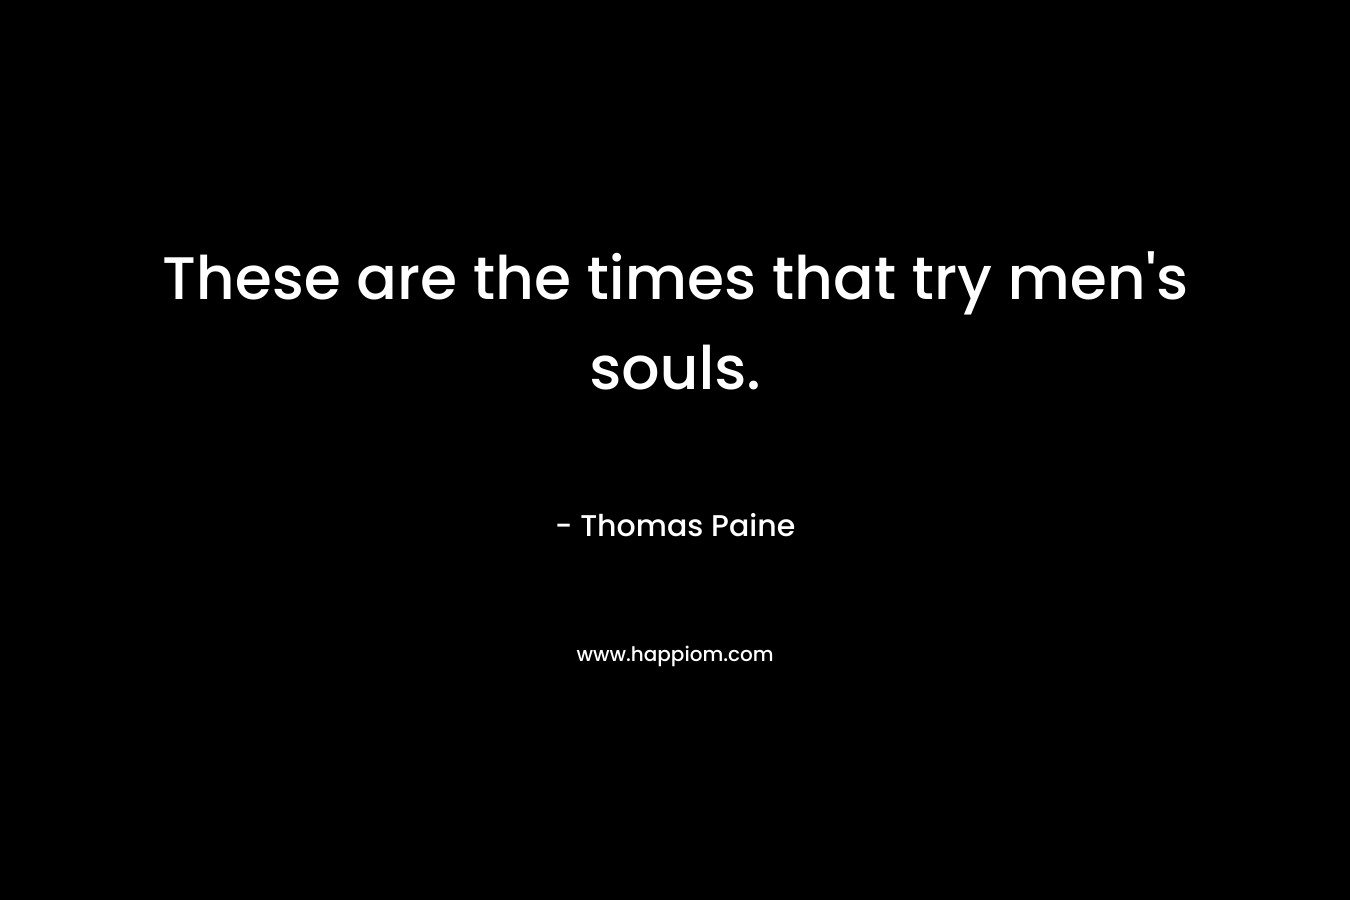 These are the times that try men’s souls. – Thomas Paine